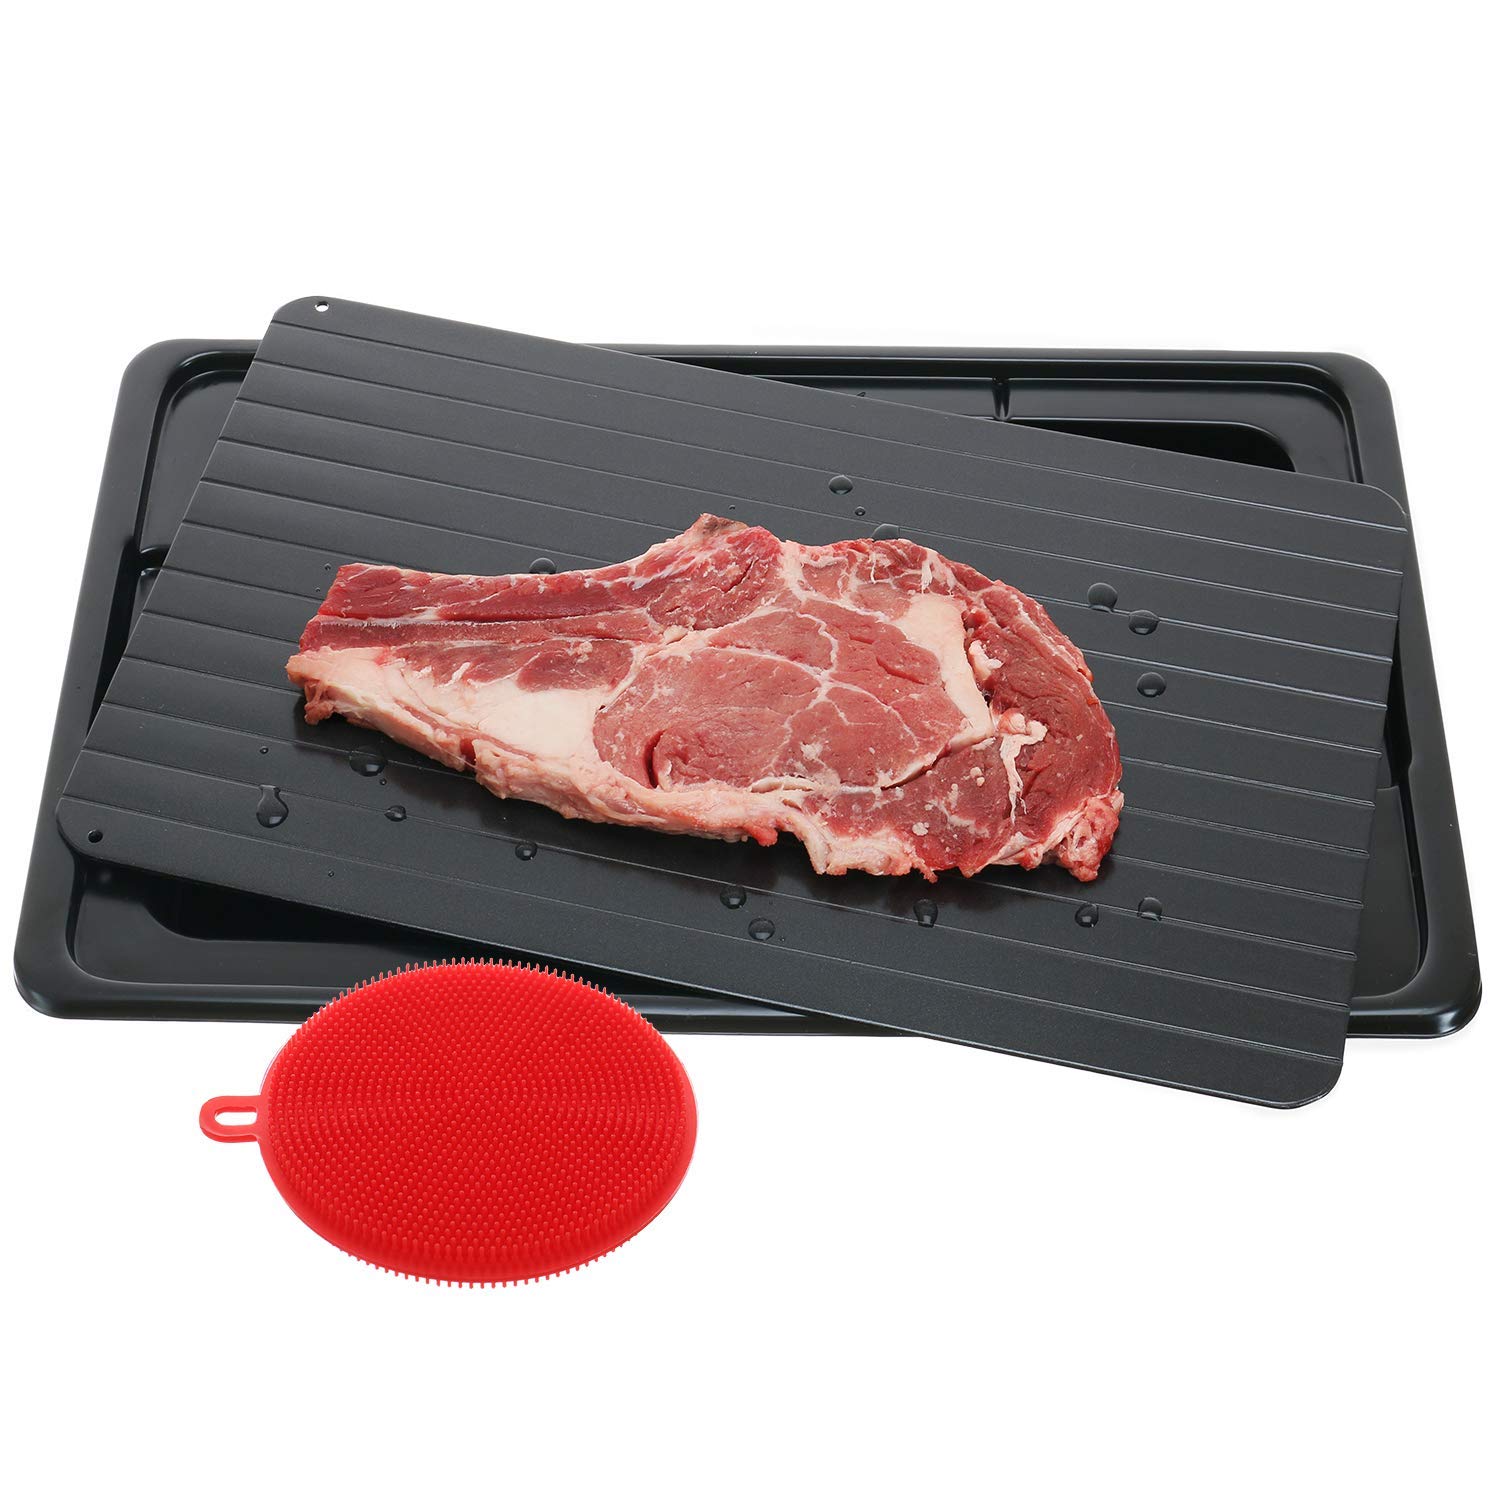 Defrosting Tray Frozen Food Thawing Plate For Fast Quick Rapid Meat Defrosting Chicken The Safest No Electricity No Microwa